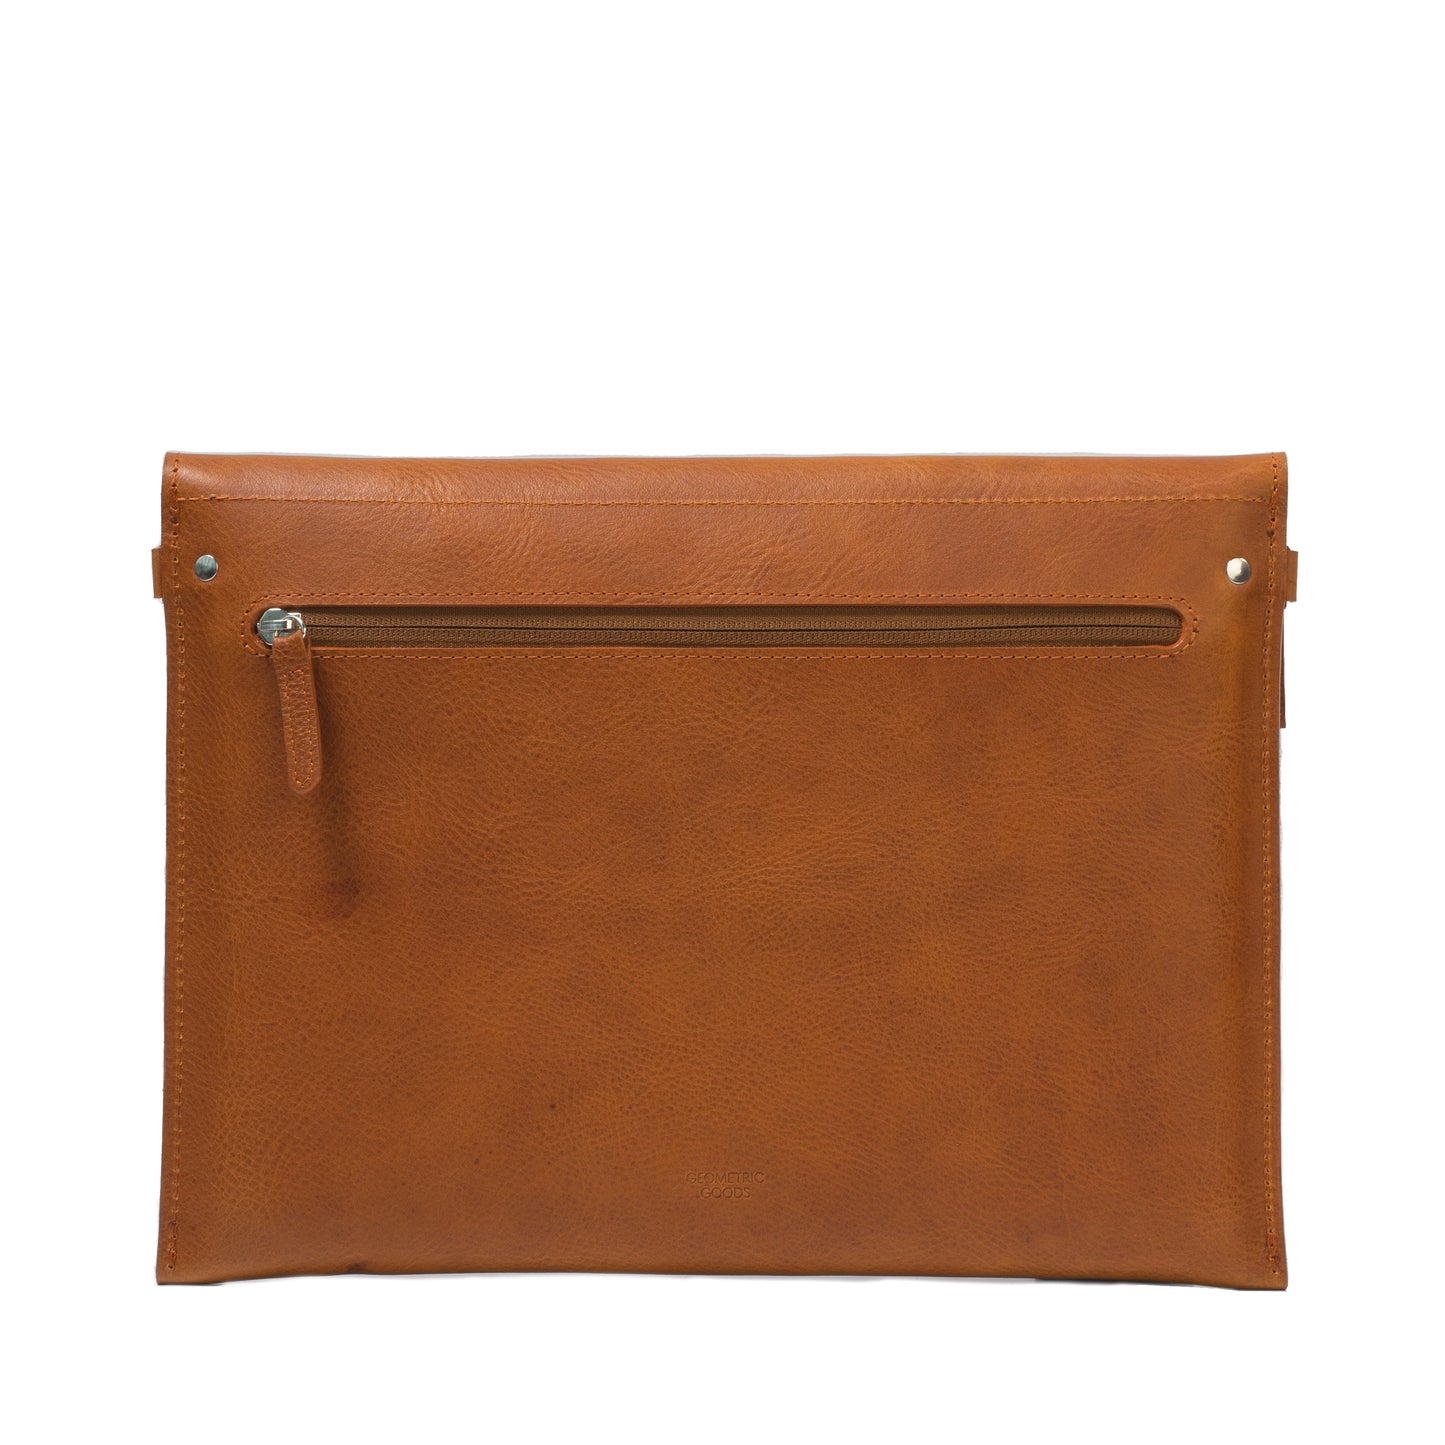 Best mens sleeve case bag for iPad Pro 12.9 inch cognac brown tan color with adjustable strap made from premium Italian leather